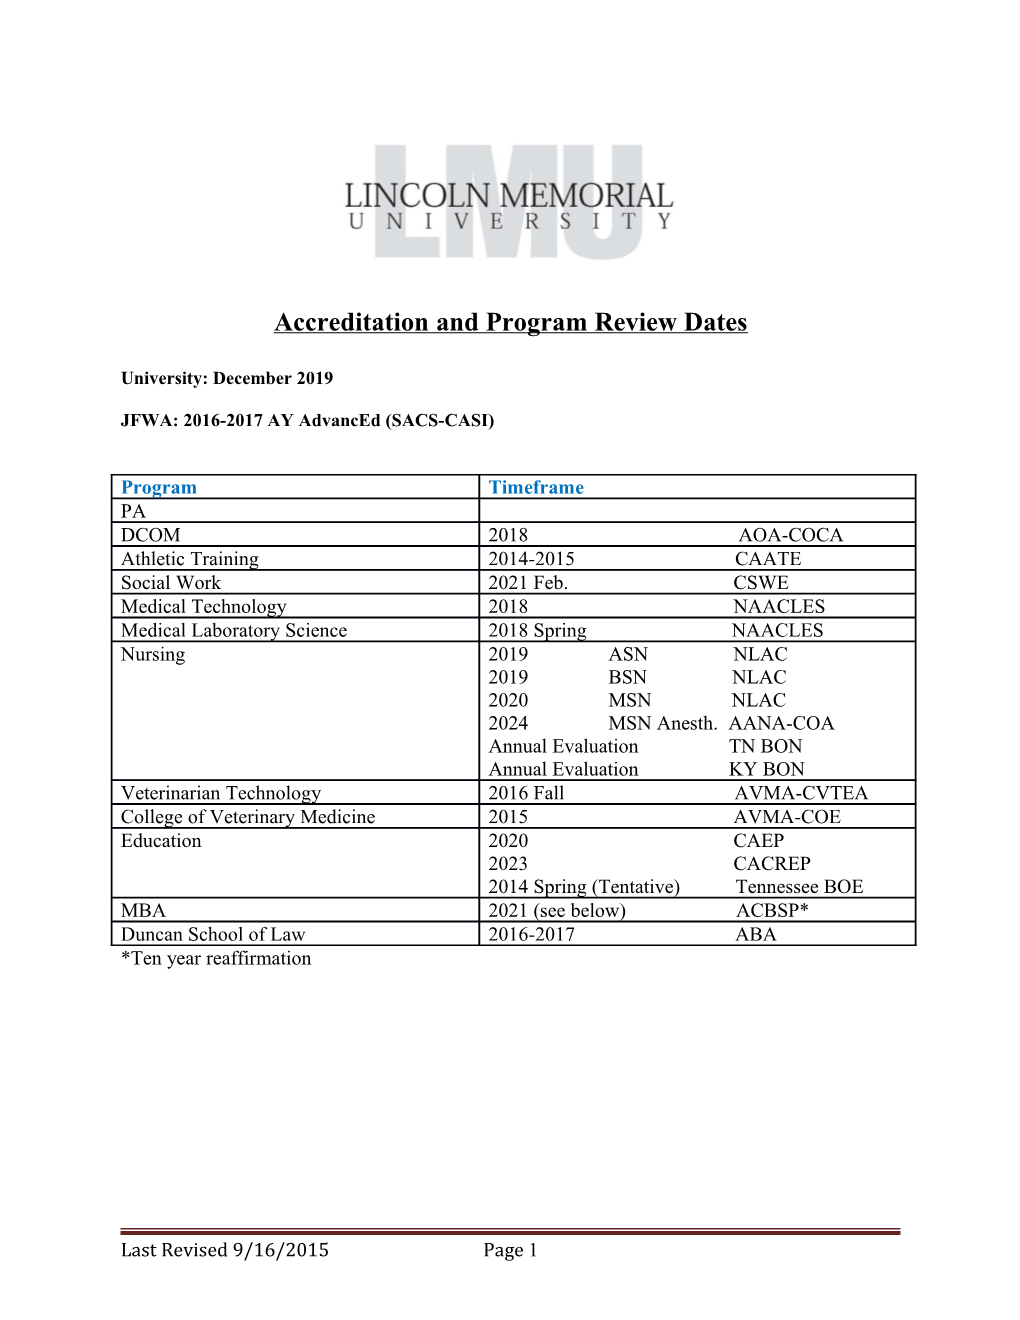 Accreditation and Program Review Dates